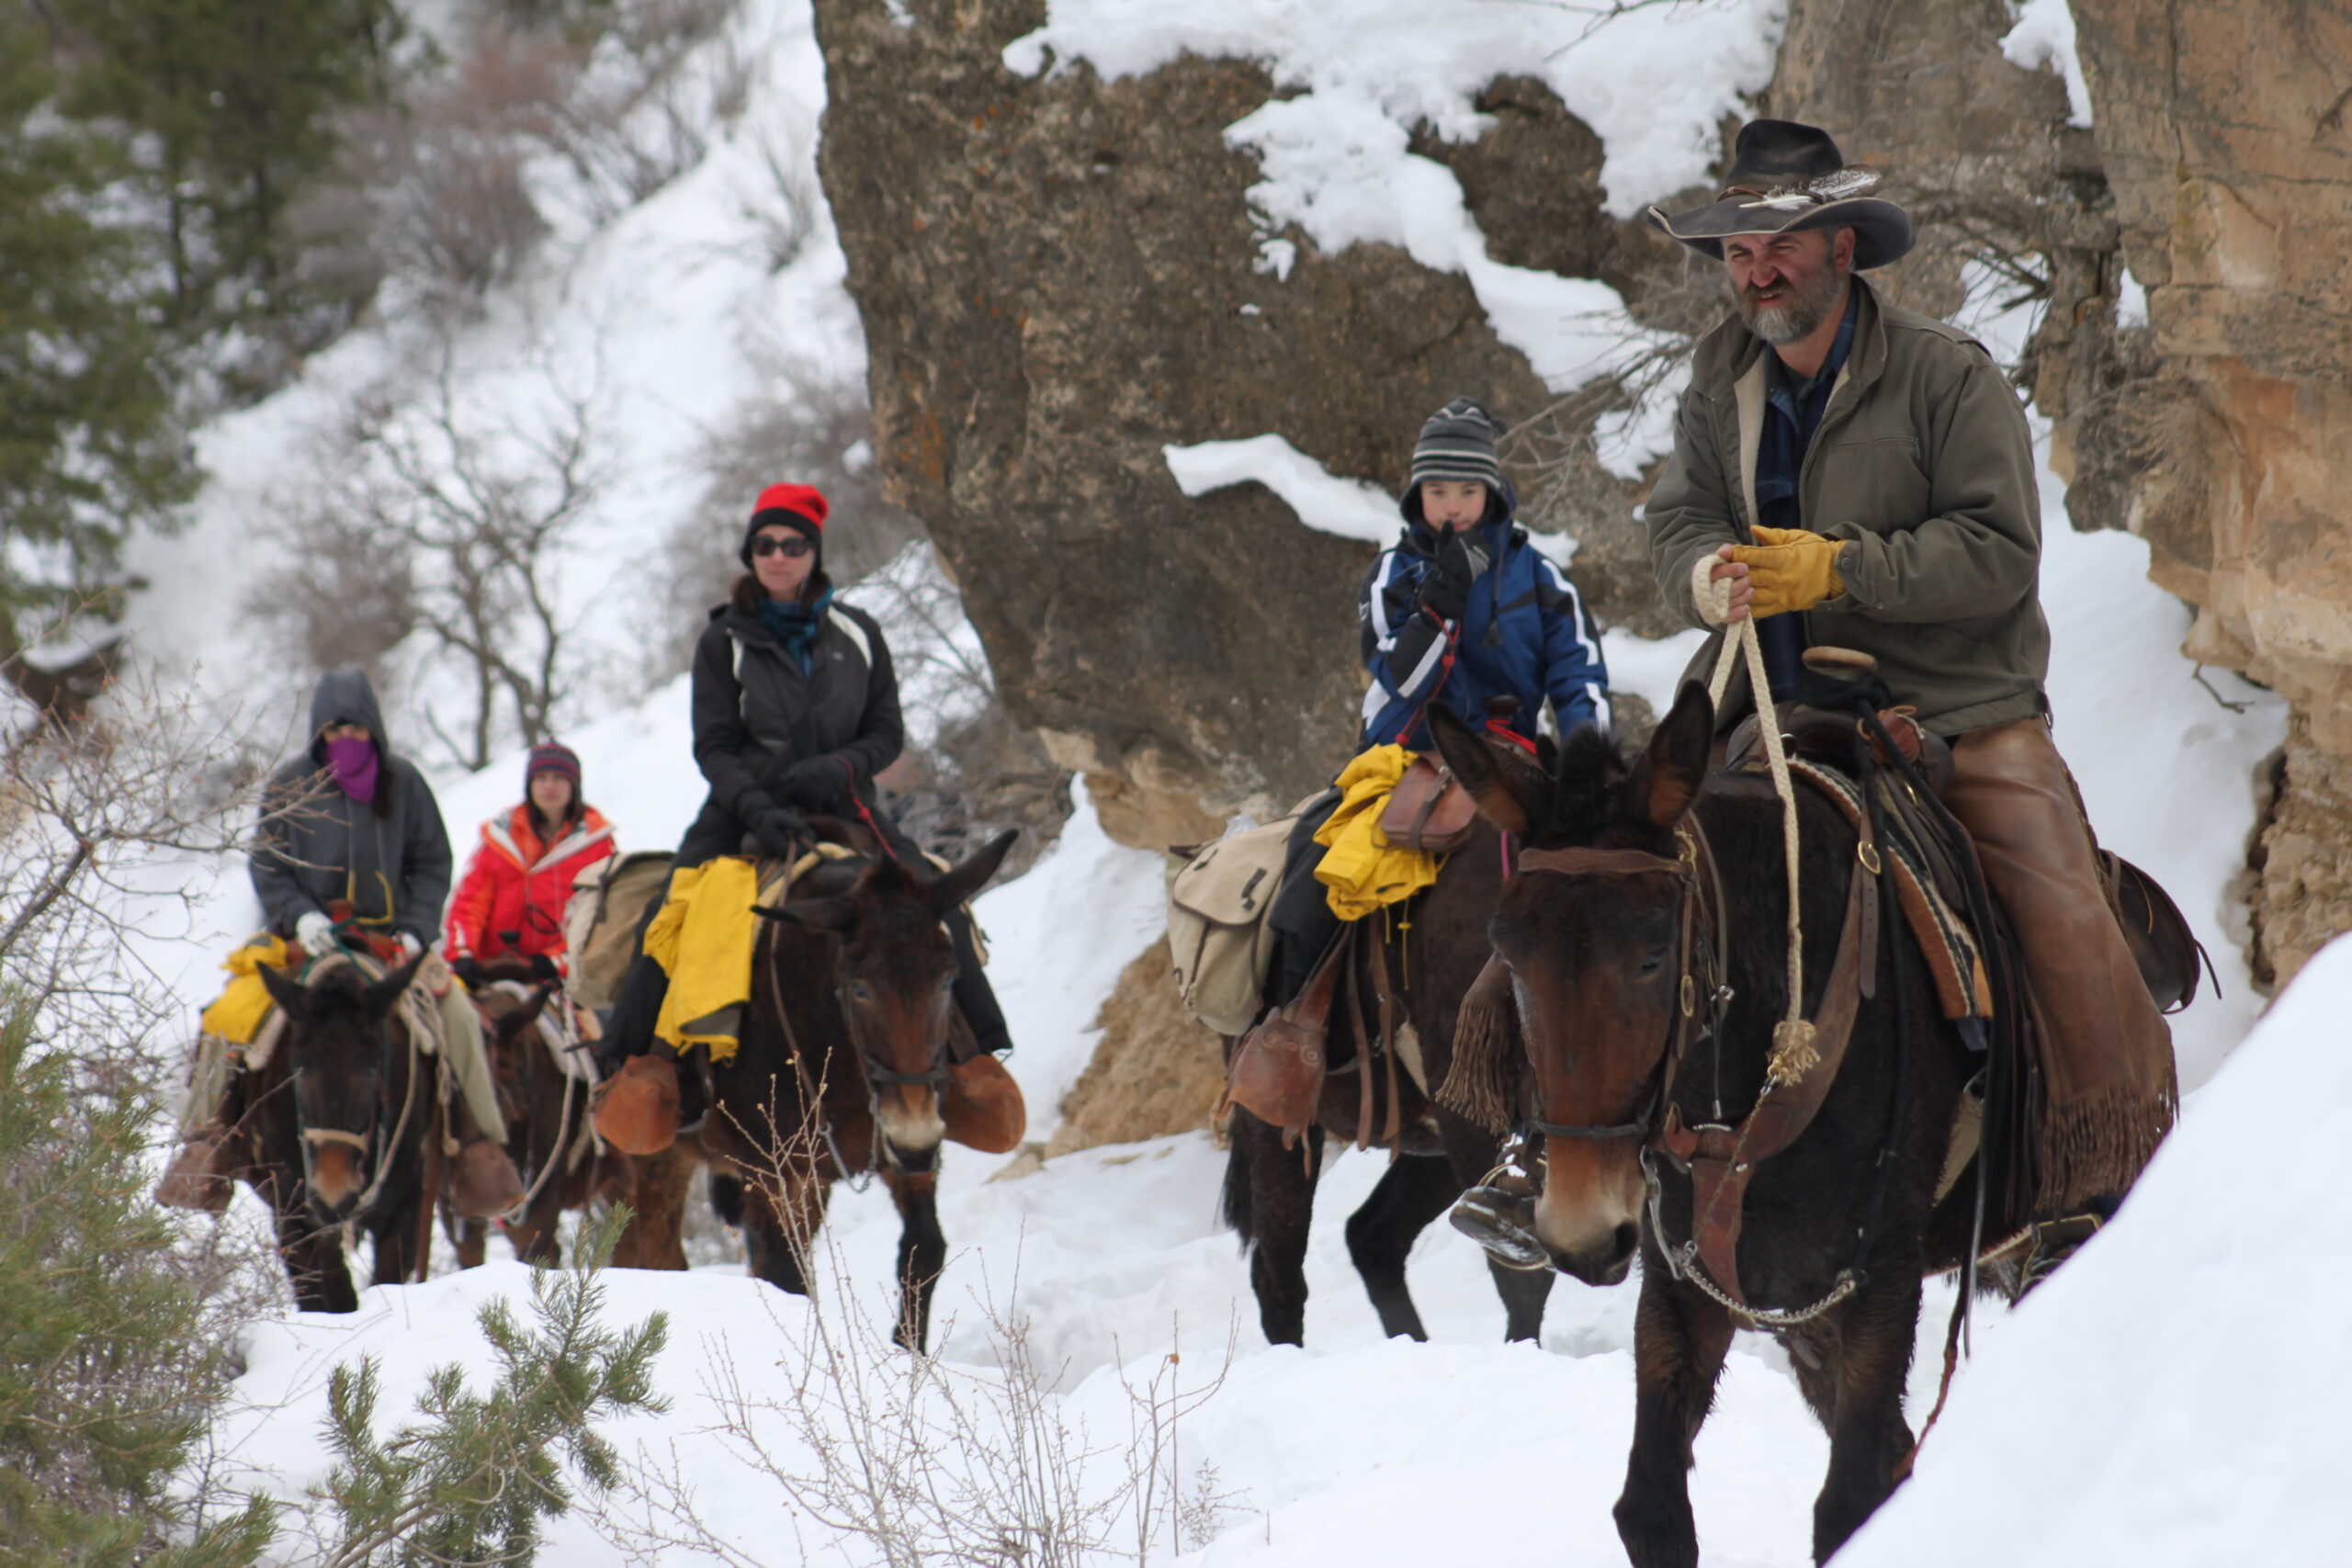 Mules carry riders down the Grand Canyon's Bright Angel Trail.